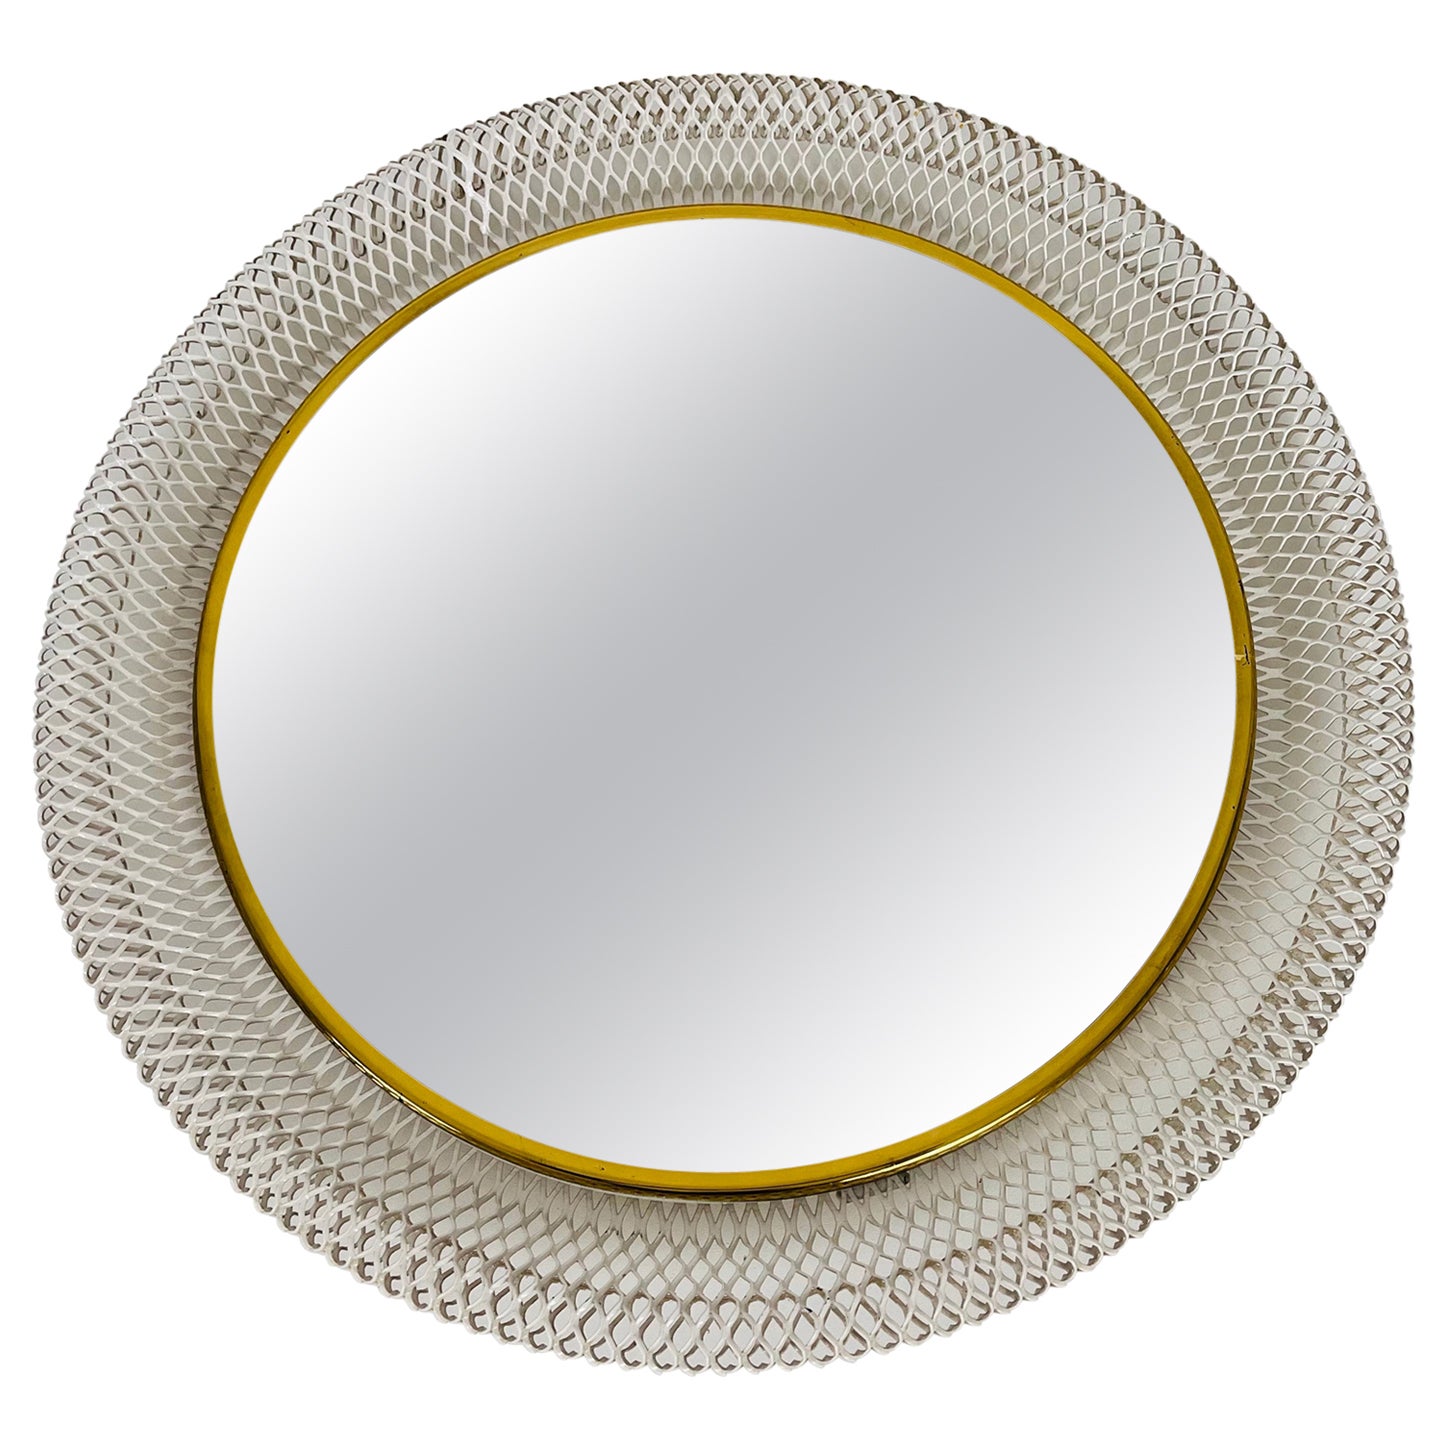 Round Italian Brass Framed Wall Mirror, 1960s, Italy For Sale